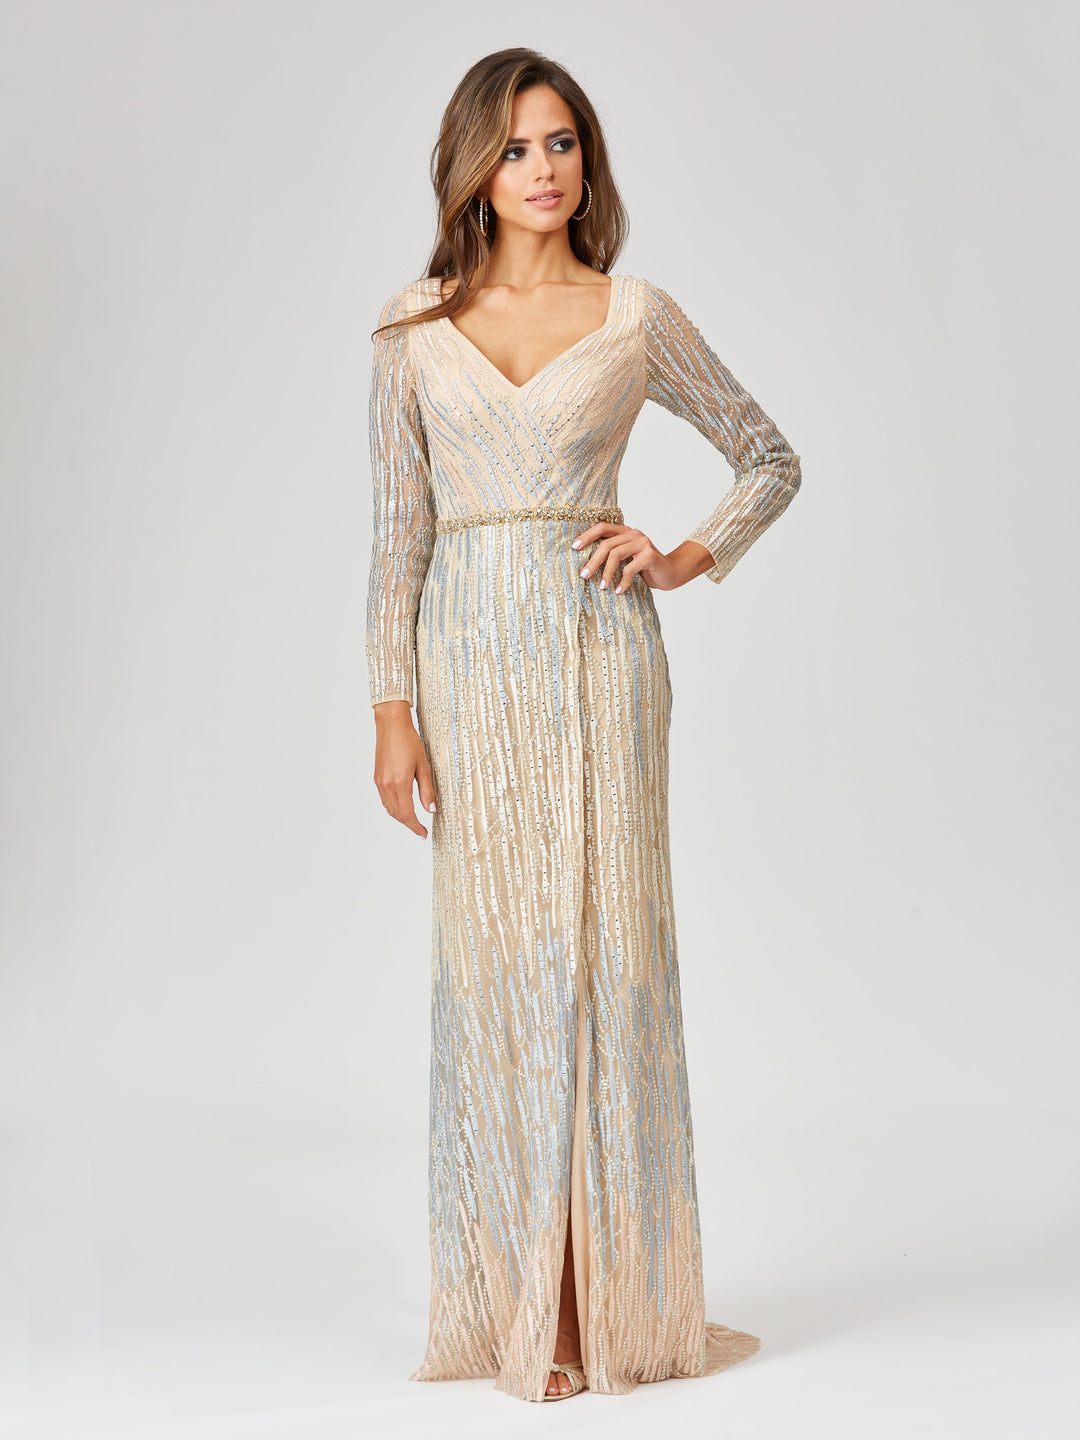 Lara 29467 - Long Sleeve Lace Gown with Wrap Skirt - FOSTANI